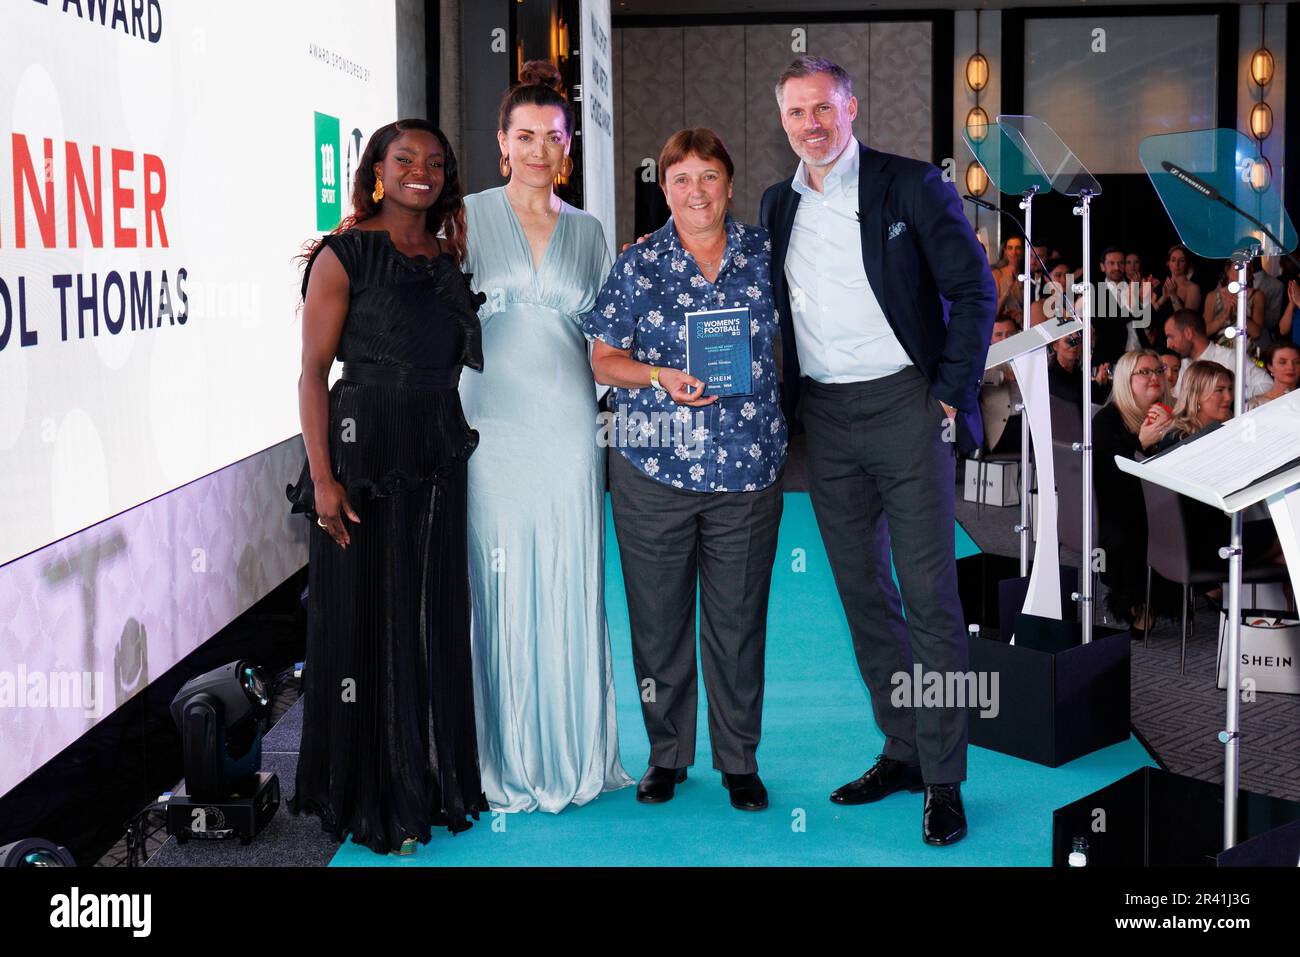 Caroline Thomas (second right) poses with the awarded Daily Mail Sport Choice Award, alongside co-hosts Eni Aluko (left) and Jamie Carragher (right) at the SHEIN Women's Football Awards held at Nobu Hotel, London. Picture date: Thursday May 25, 2022. Stock Photo